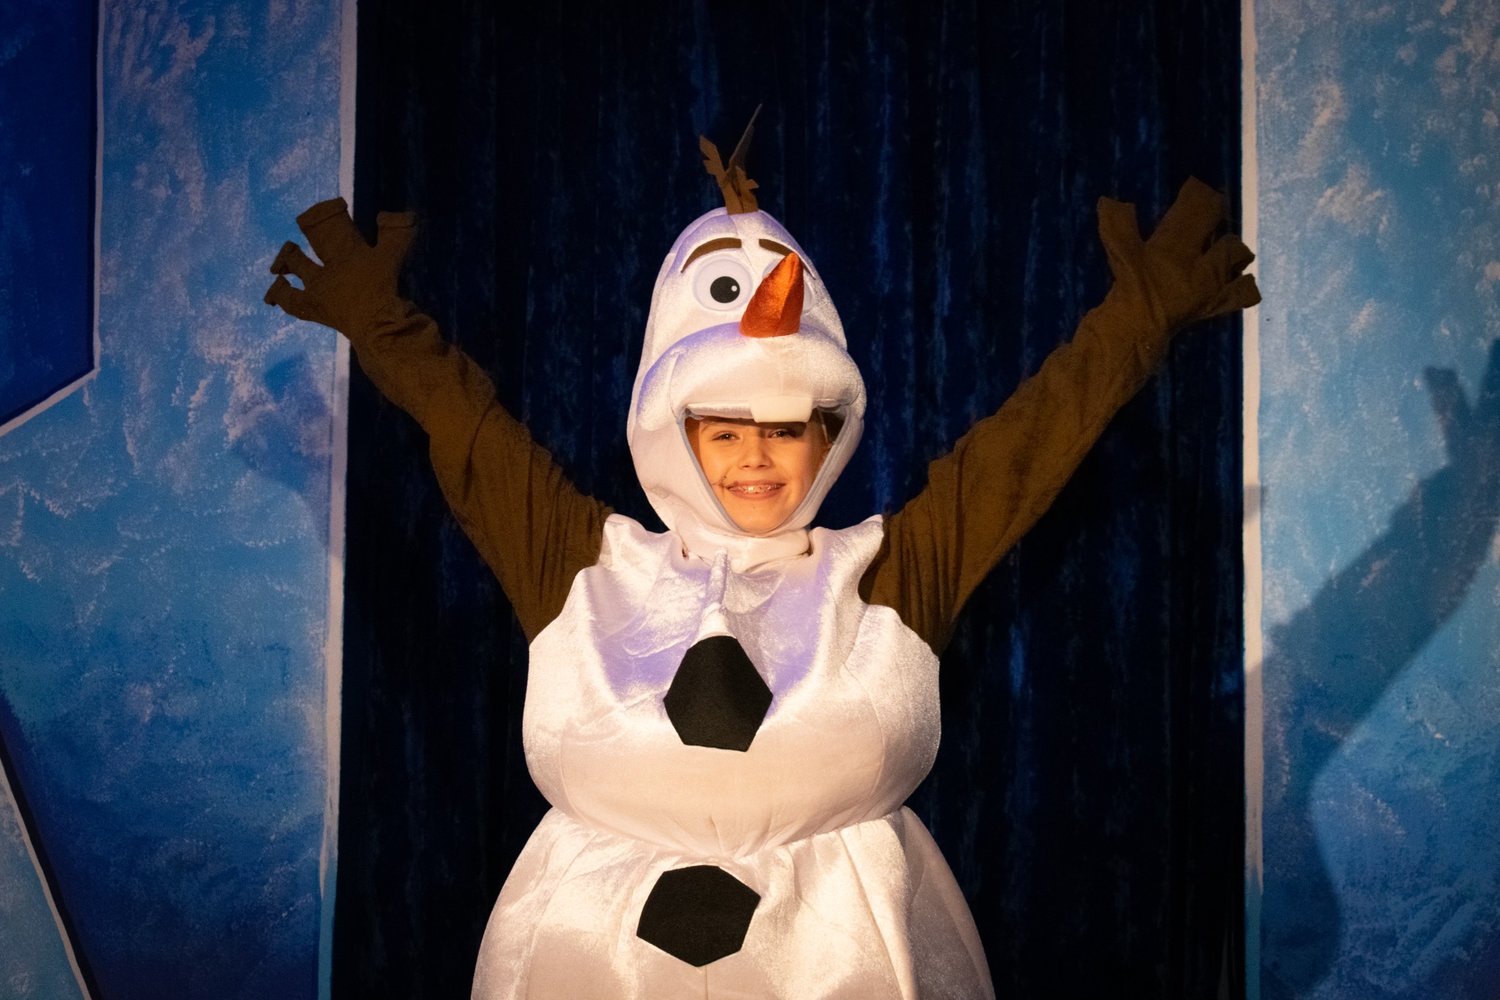 Olaf is played by Madilyn Biddle.